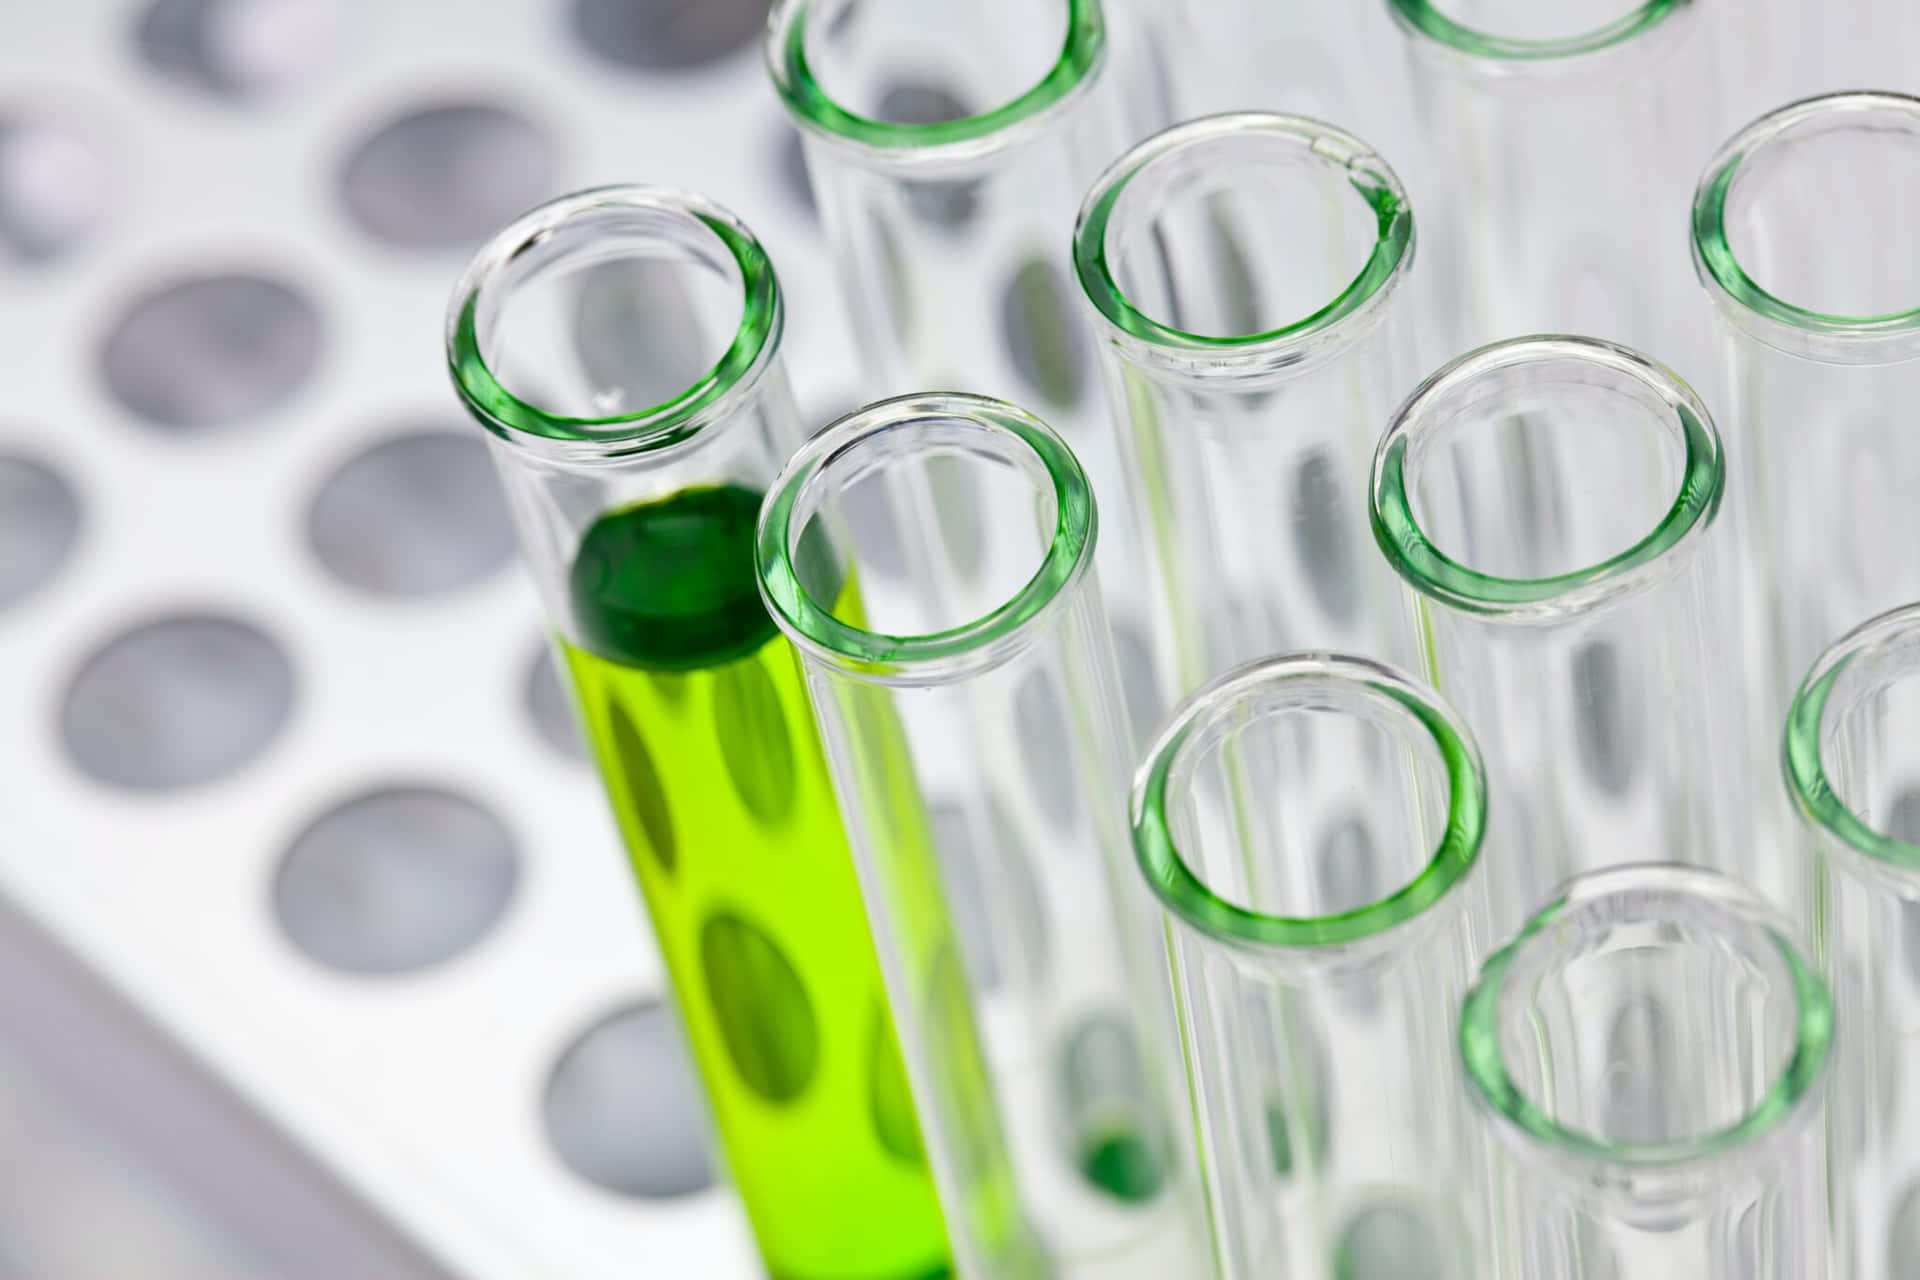 A Group Of Test Tubes With Green Liquid In Them